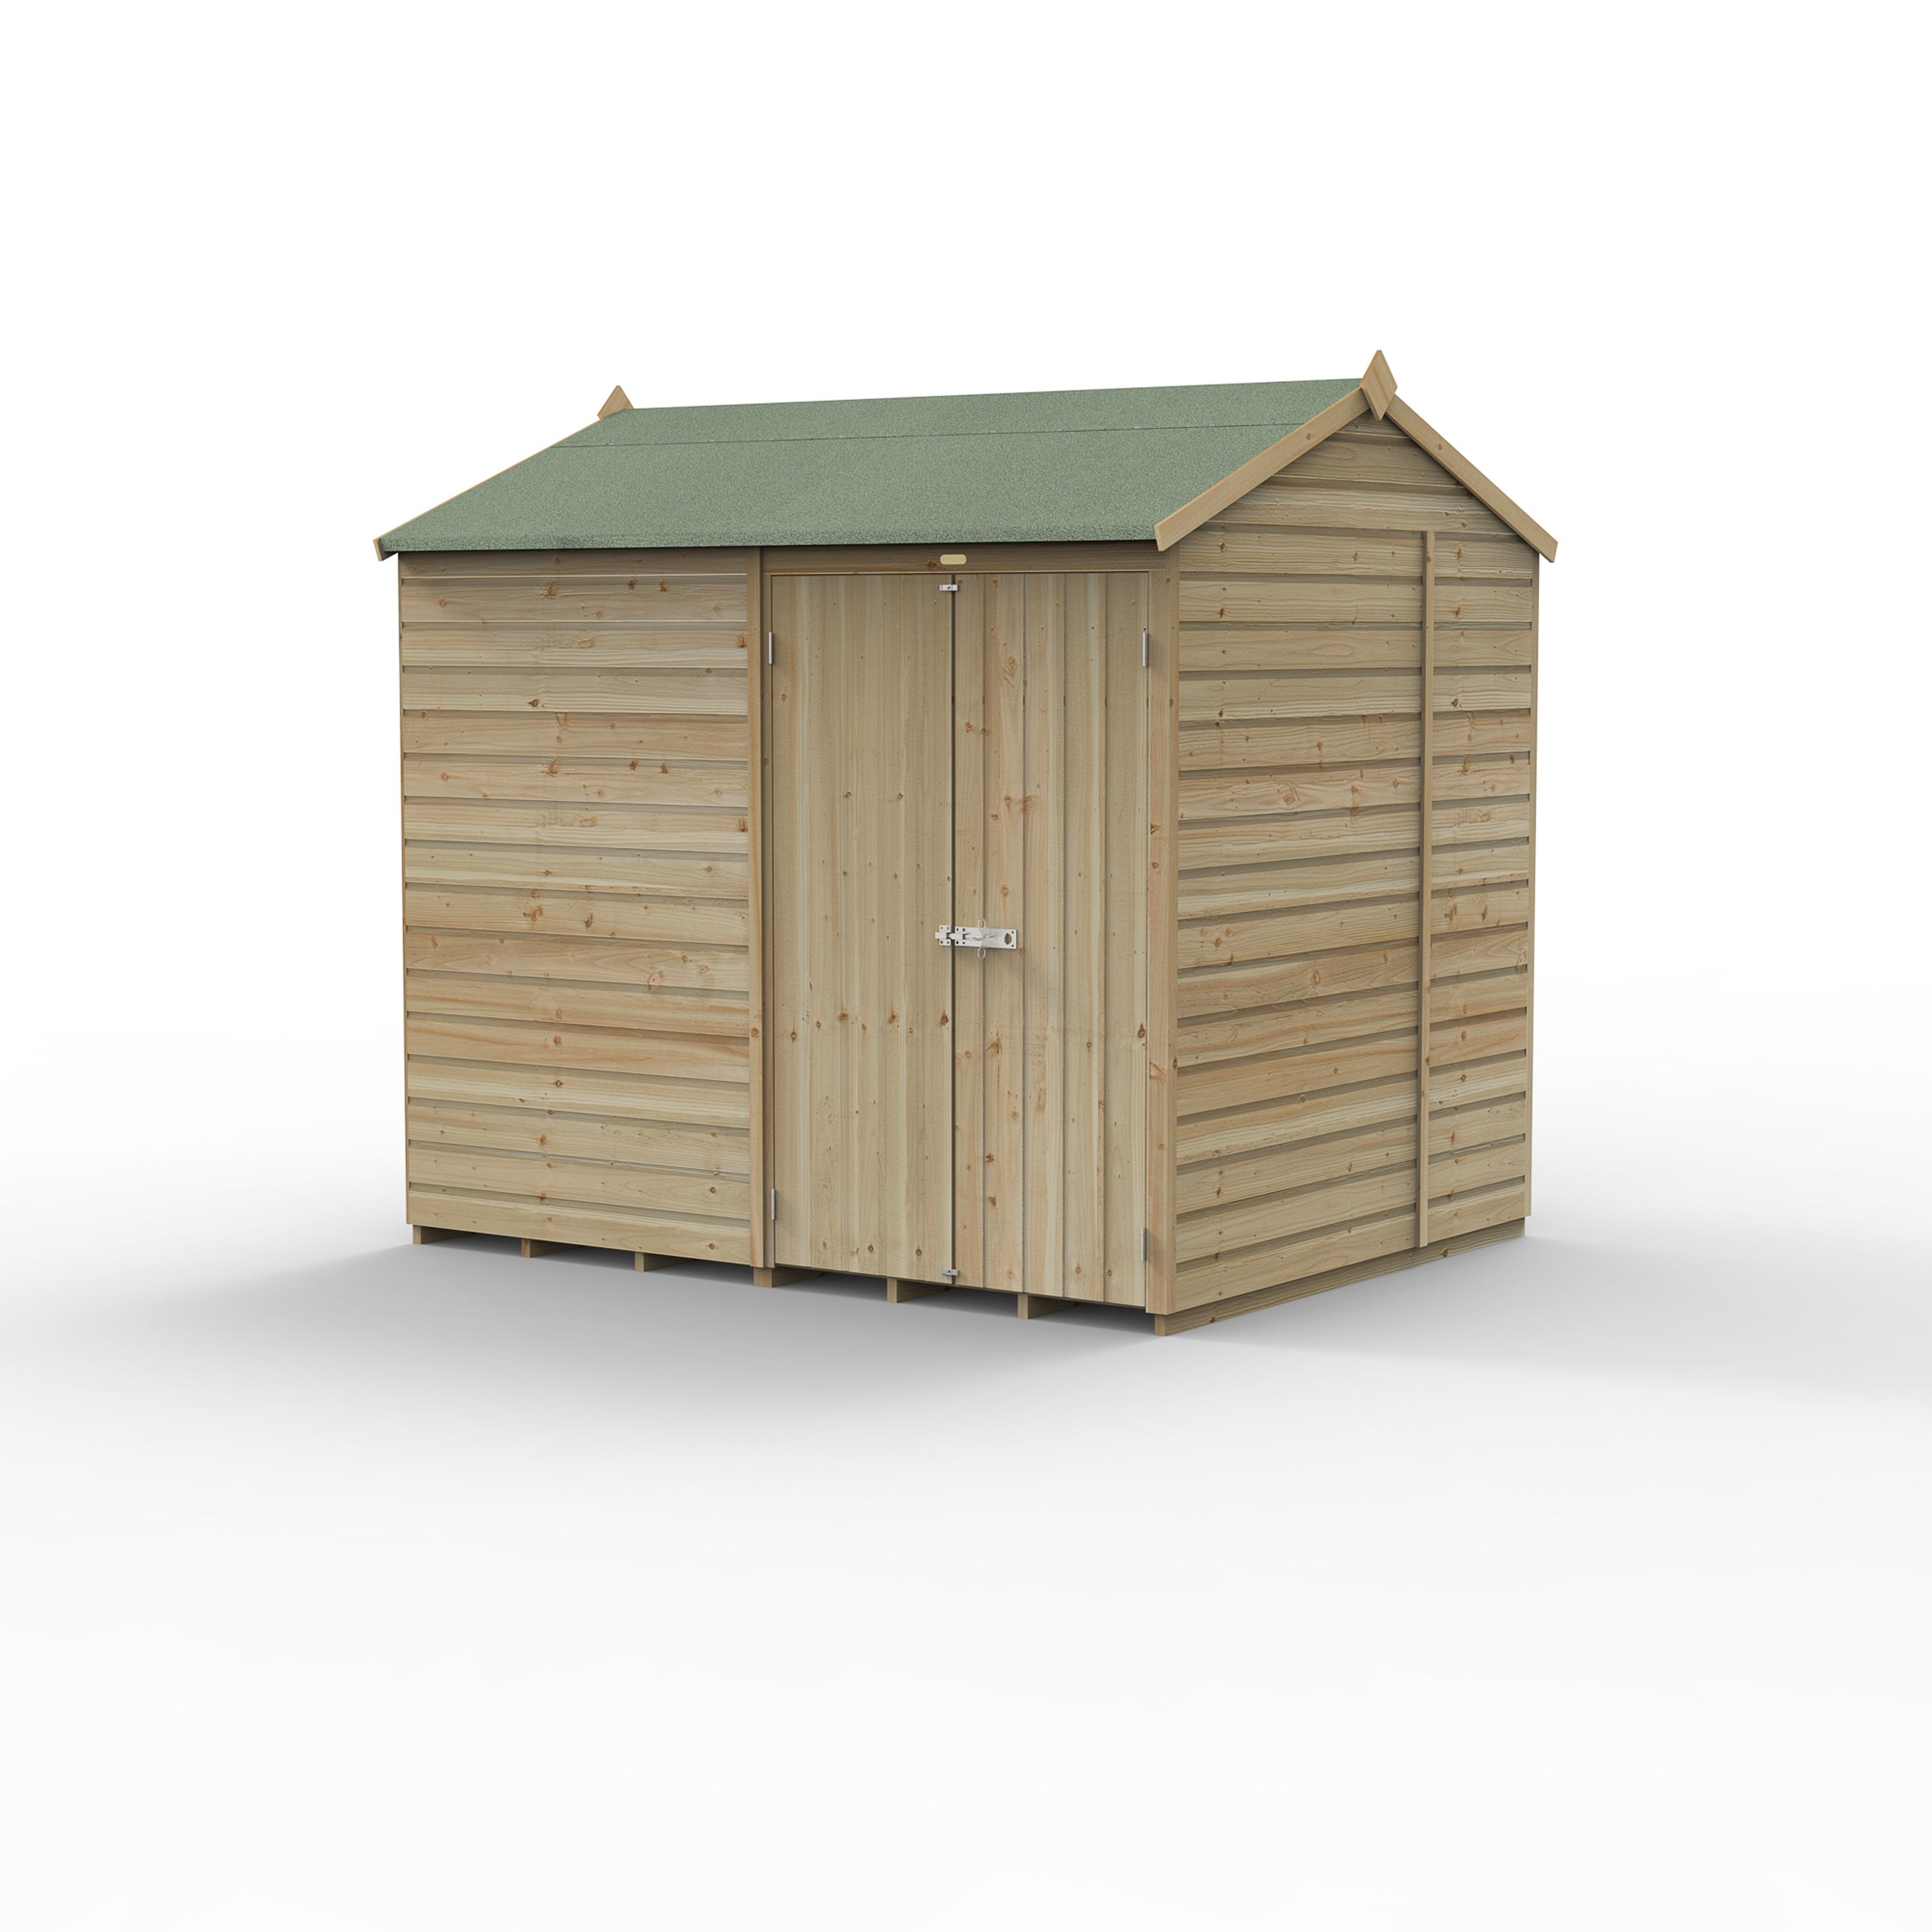 Forest Garden Beckwood 8x6 ft Reverse apex Natural timber Wooden 2 door Shed with floor - Assembly not required